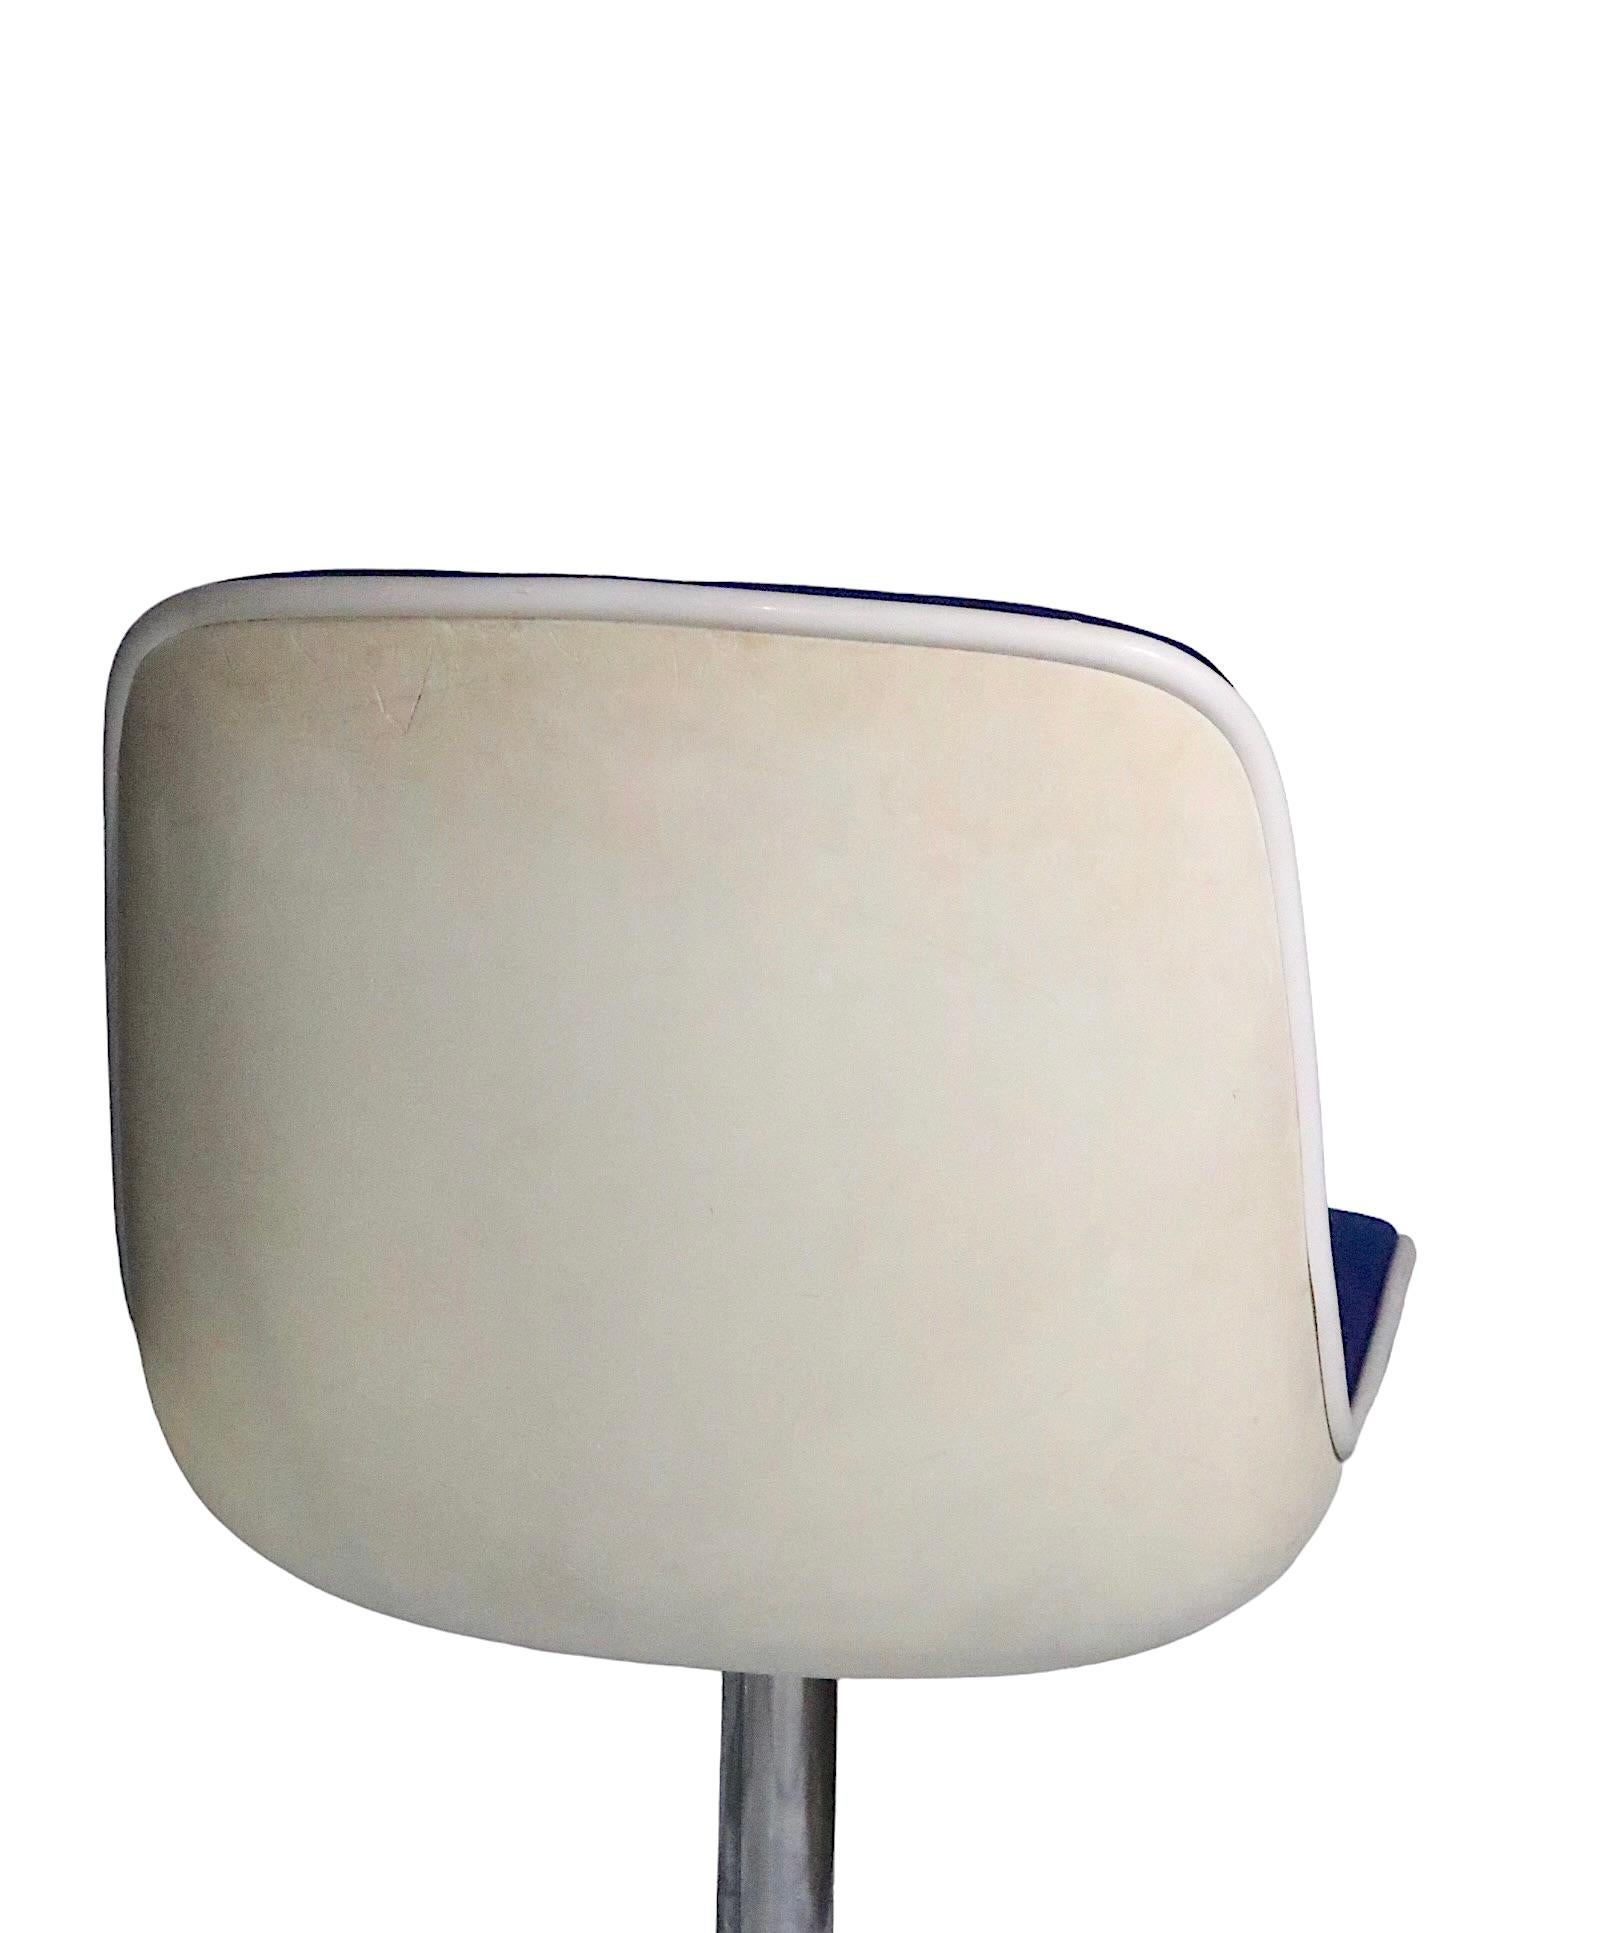 Steelcase Swivel  Chairs in the style of Pollack c.1970's 6 available For Sale 2